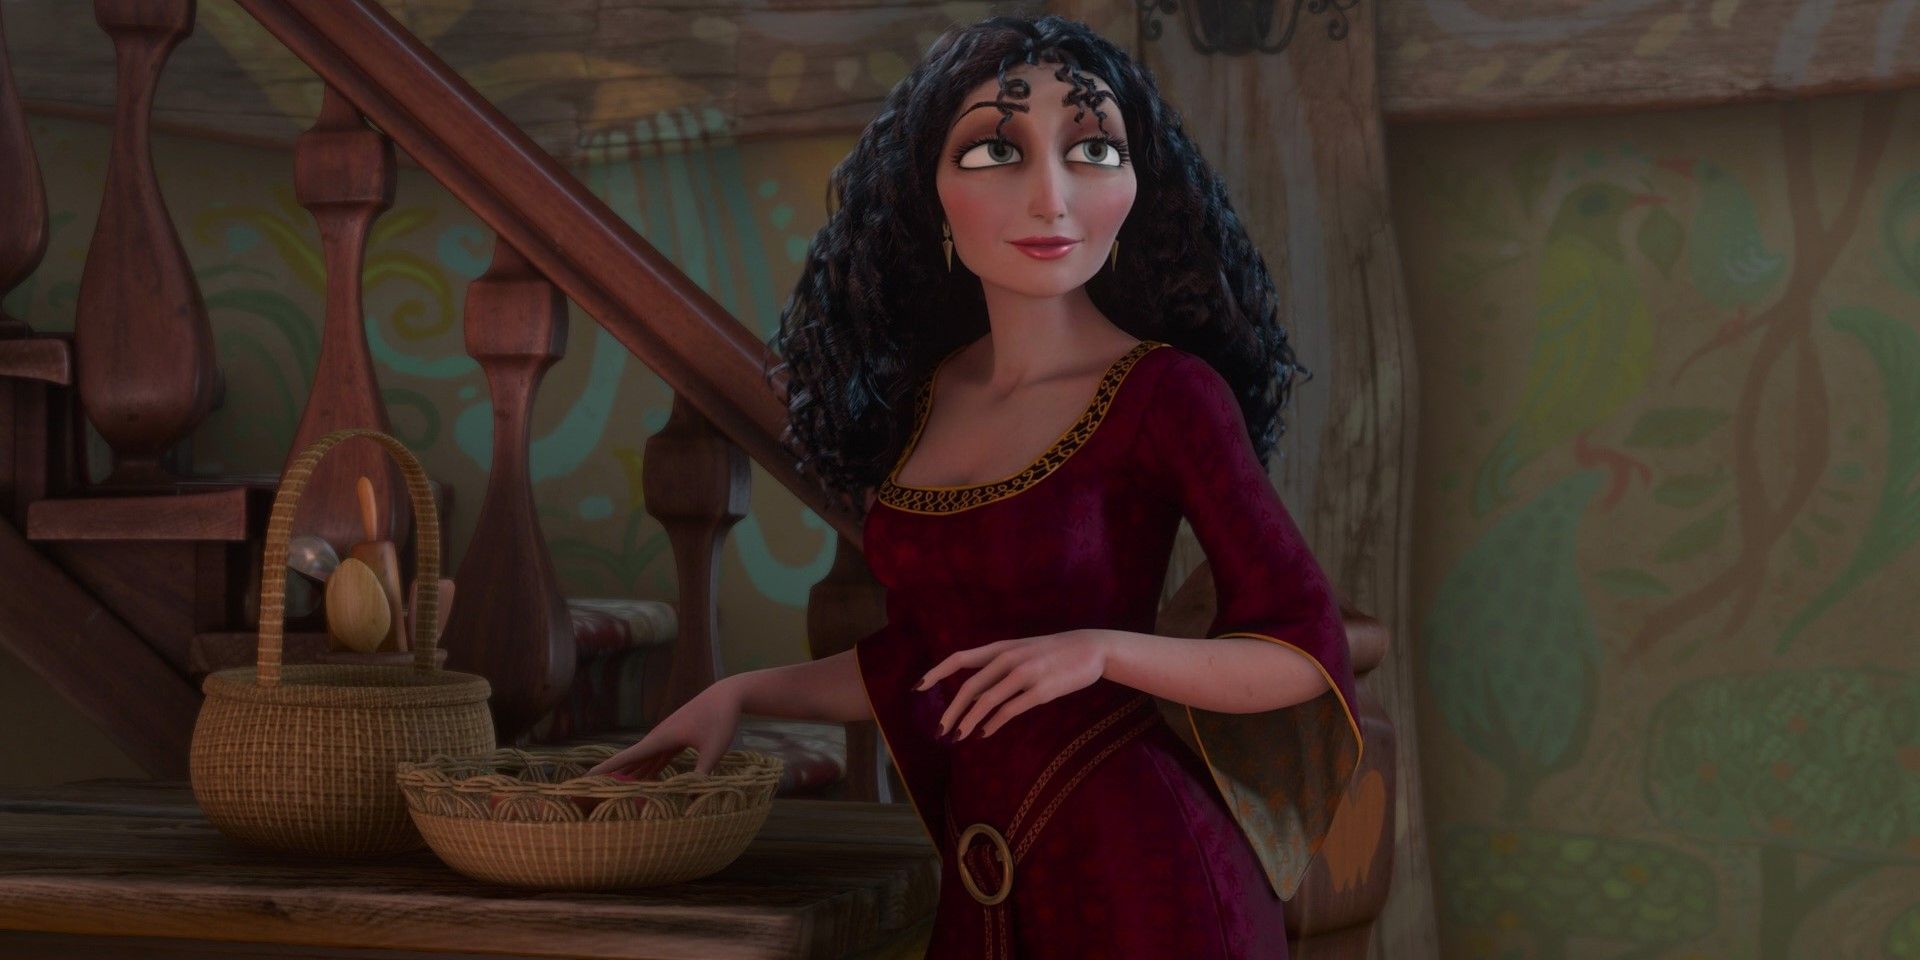 Mother Gothel in Tangled looking evil